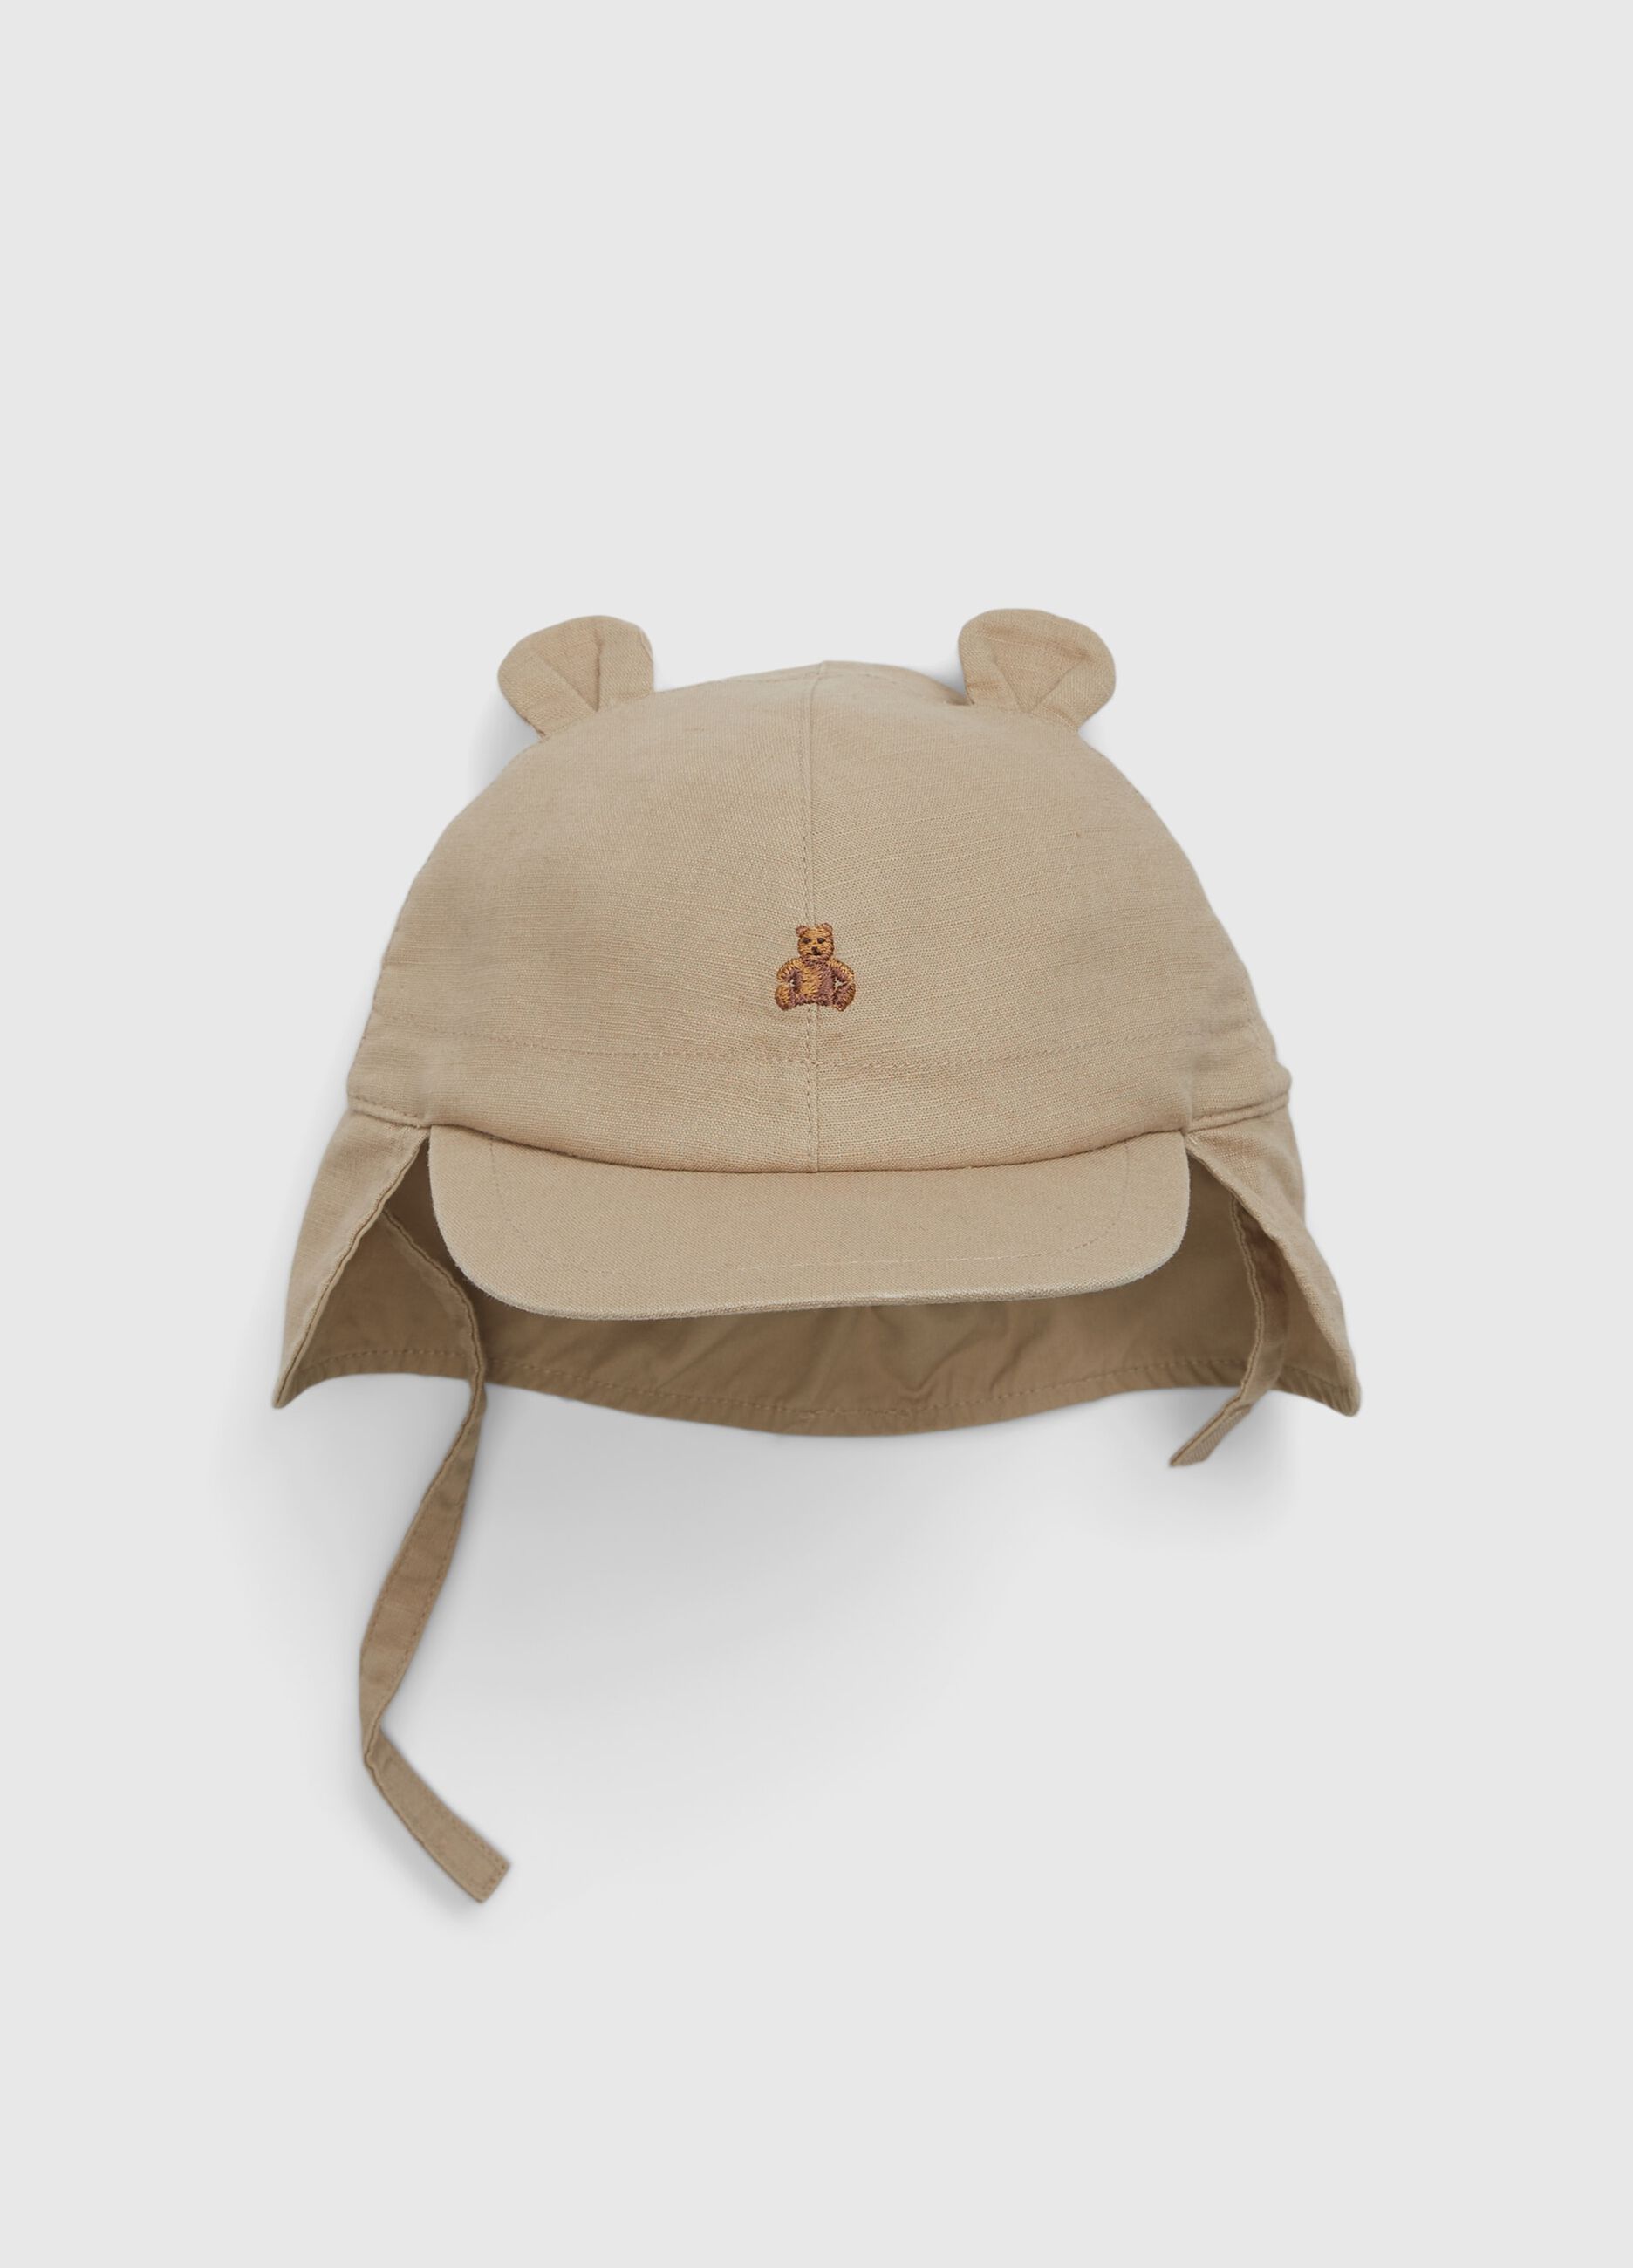 Linen and cotton hat with teddy bear embroidery